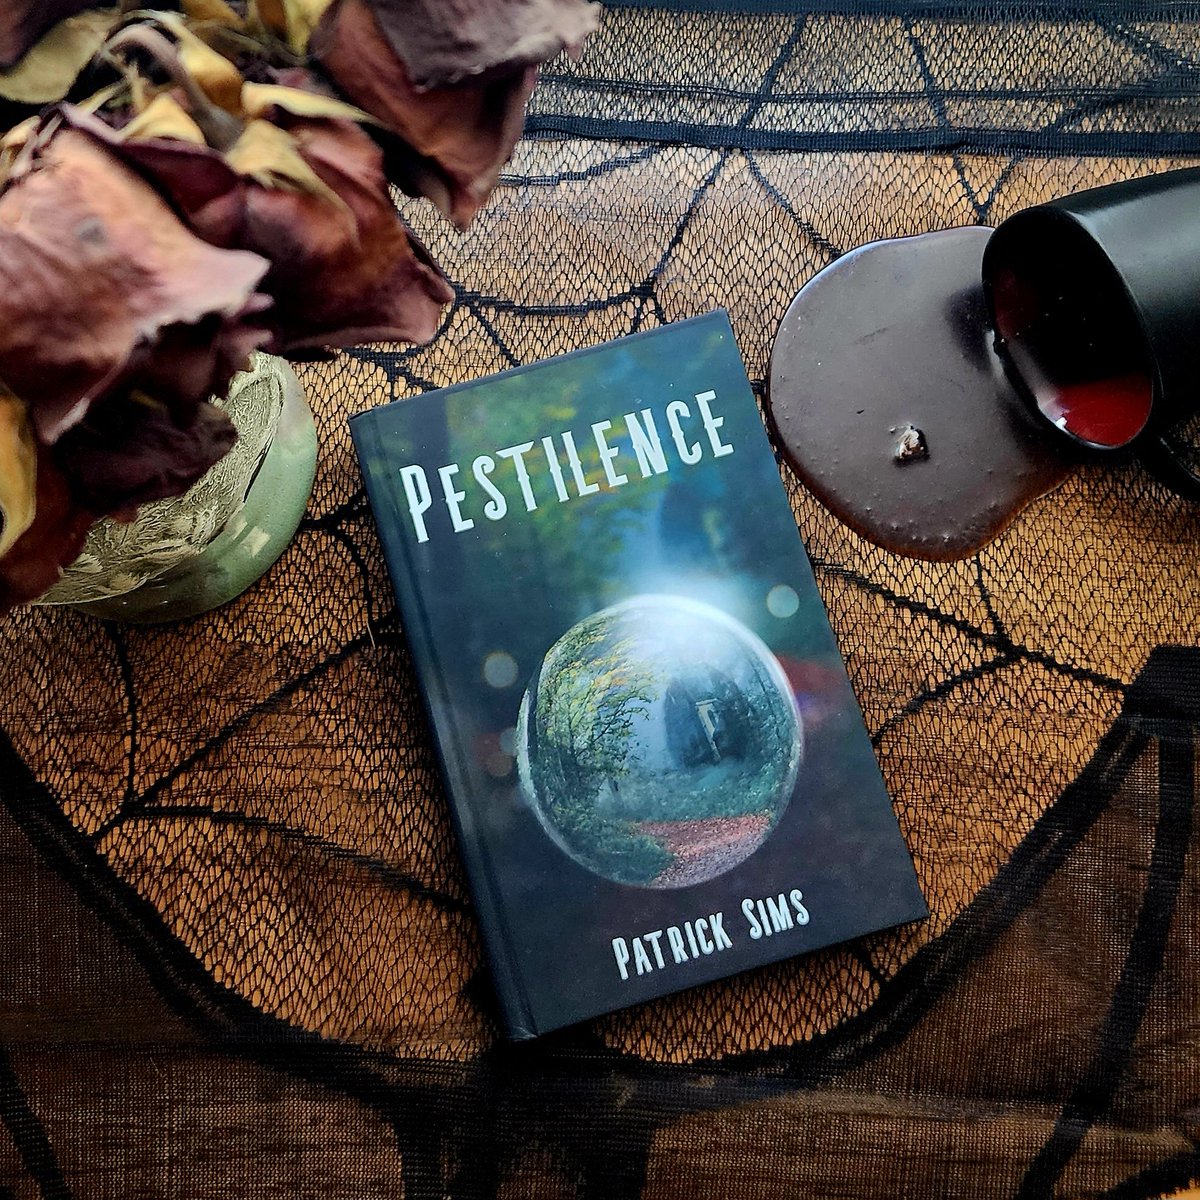 Pestilence (The Decimation Series - Book One) 

a.co/d/htT8bhQ

#bookcoverdesigner #marriedtomybestfriend #indiebookcovers #dystopianbooks #writerscommunity #bookseries